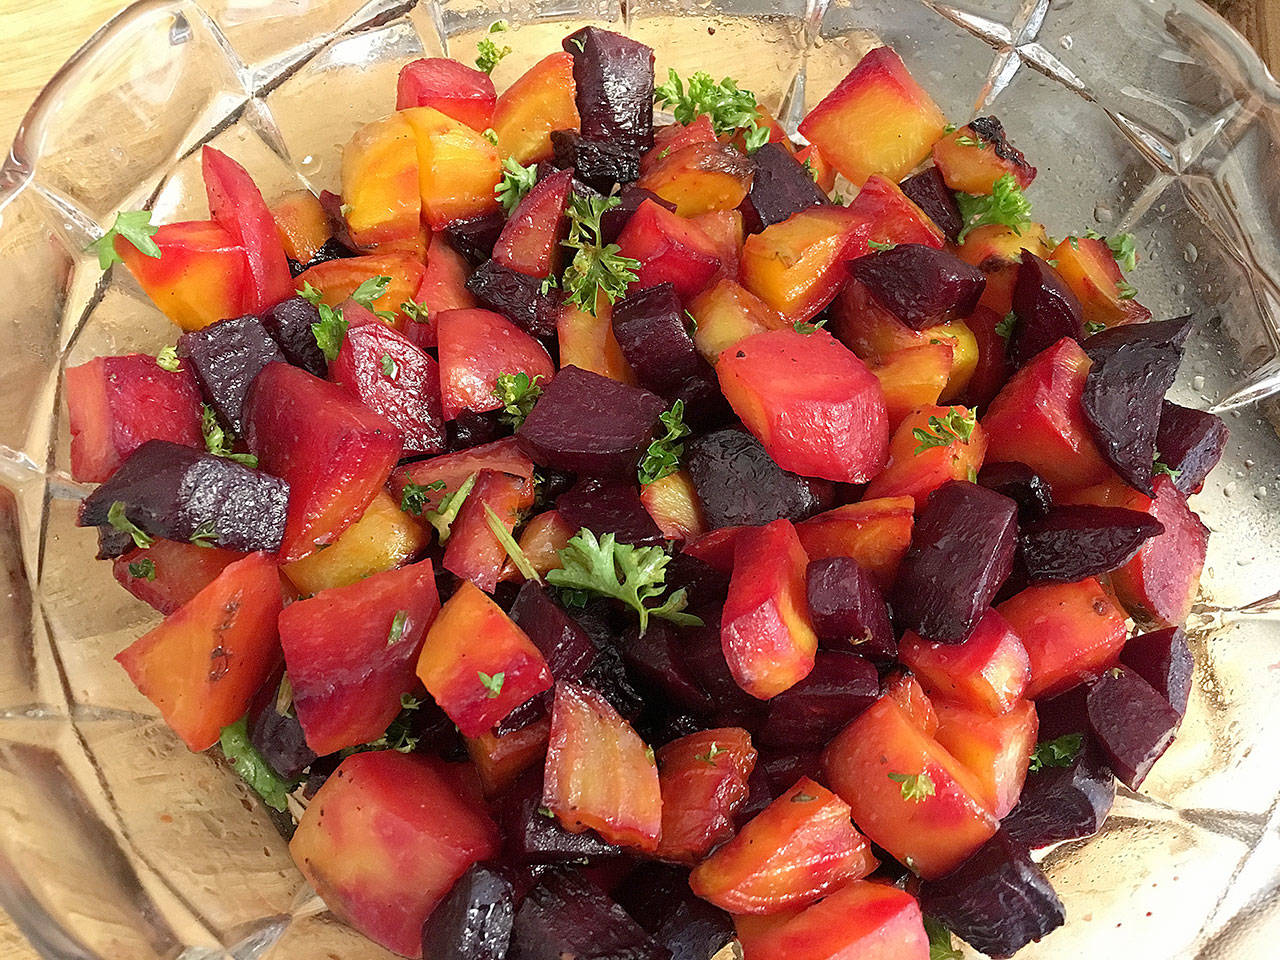 Buttered beets, a recipe from the cookbook, “A Feast of Ice & Fire: The Official Companion Cookbook,” add a splash of color and an earthy taste for a large meal when watching the HBO show “Game of Thrones.” (Ben Watanabe / The Herald)